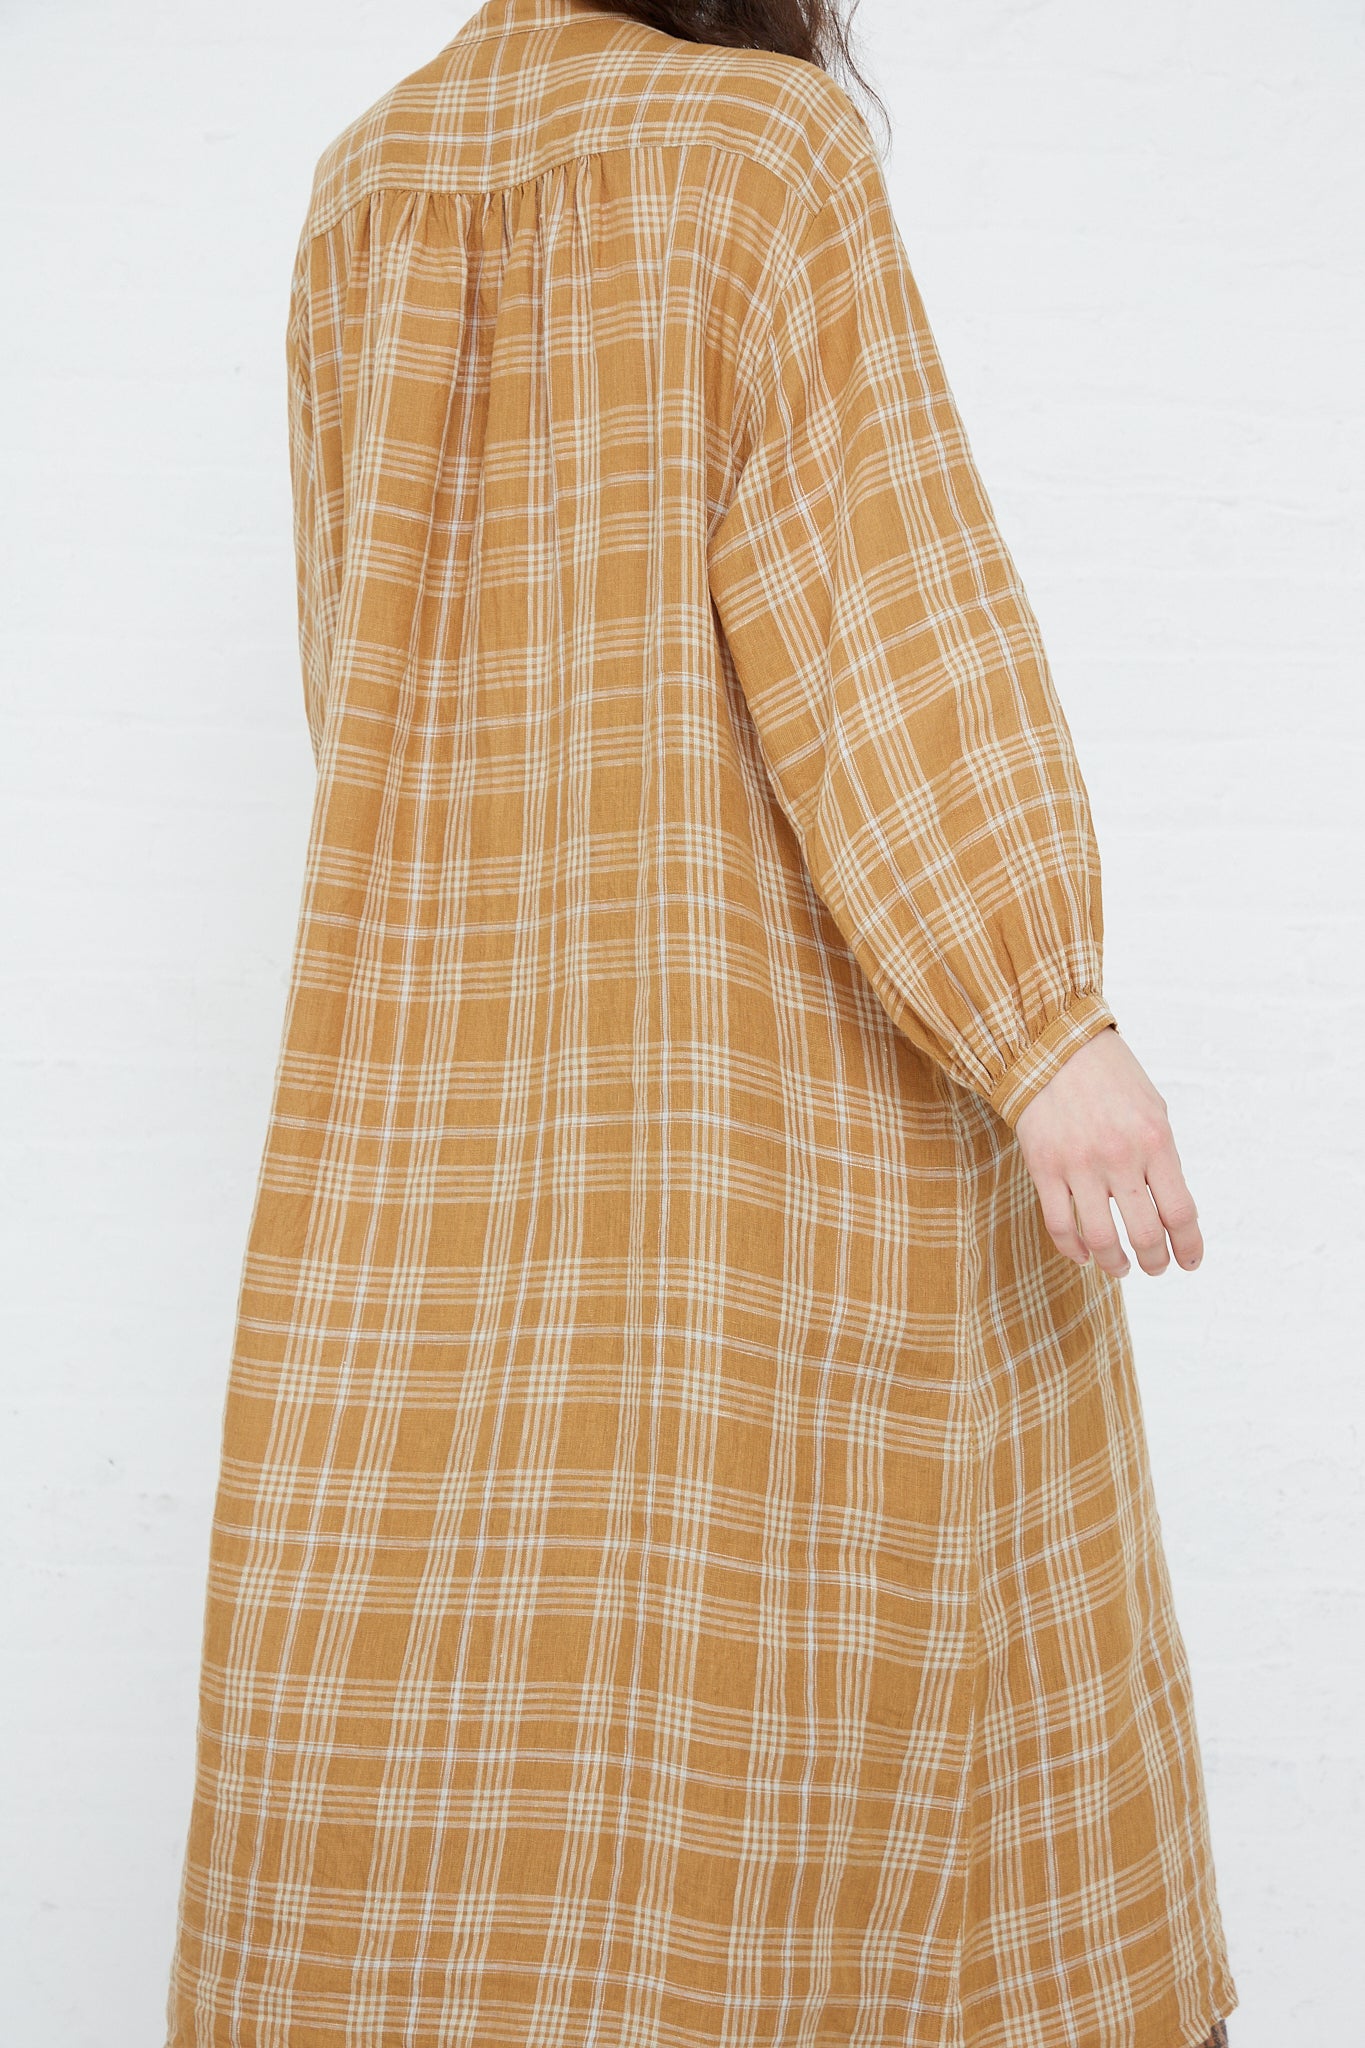 The back of a woman wearing a Linen Check Dress in Camel by Ichi Antiquités.